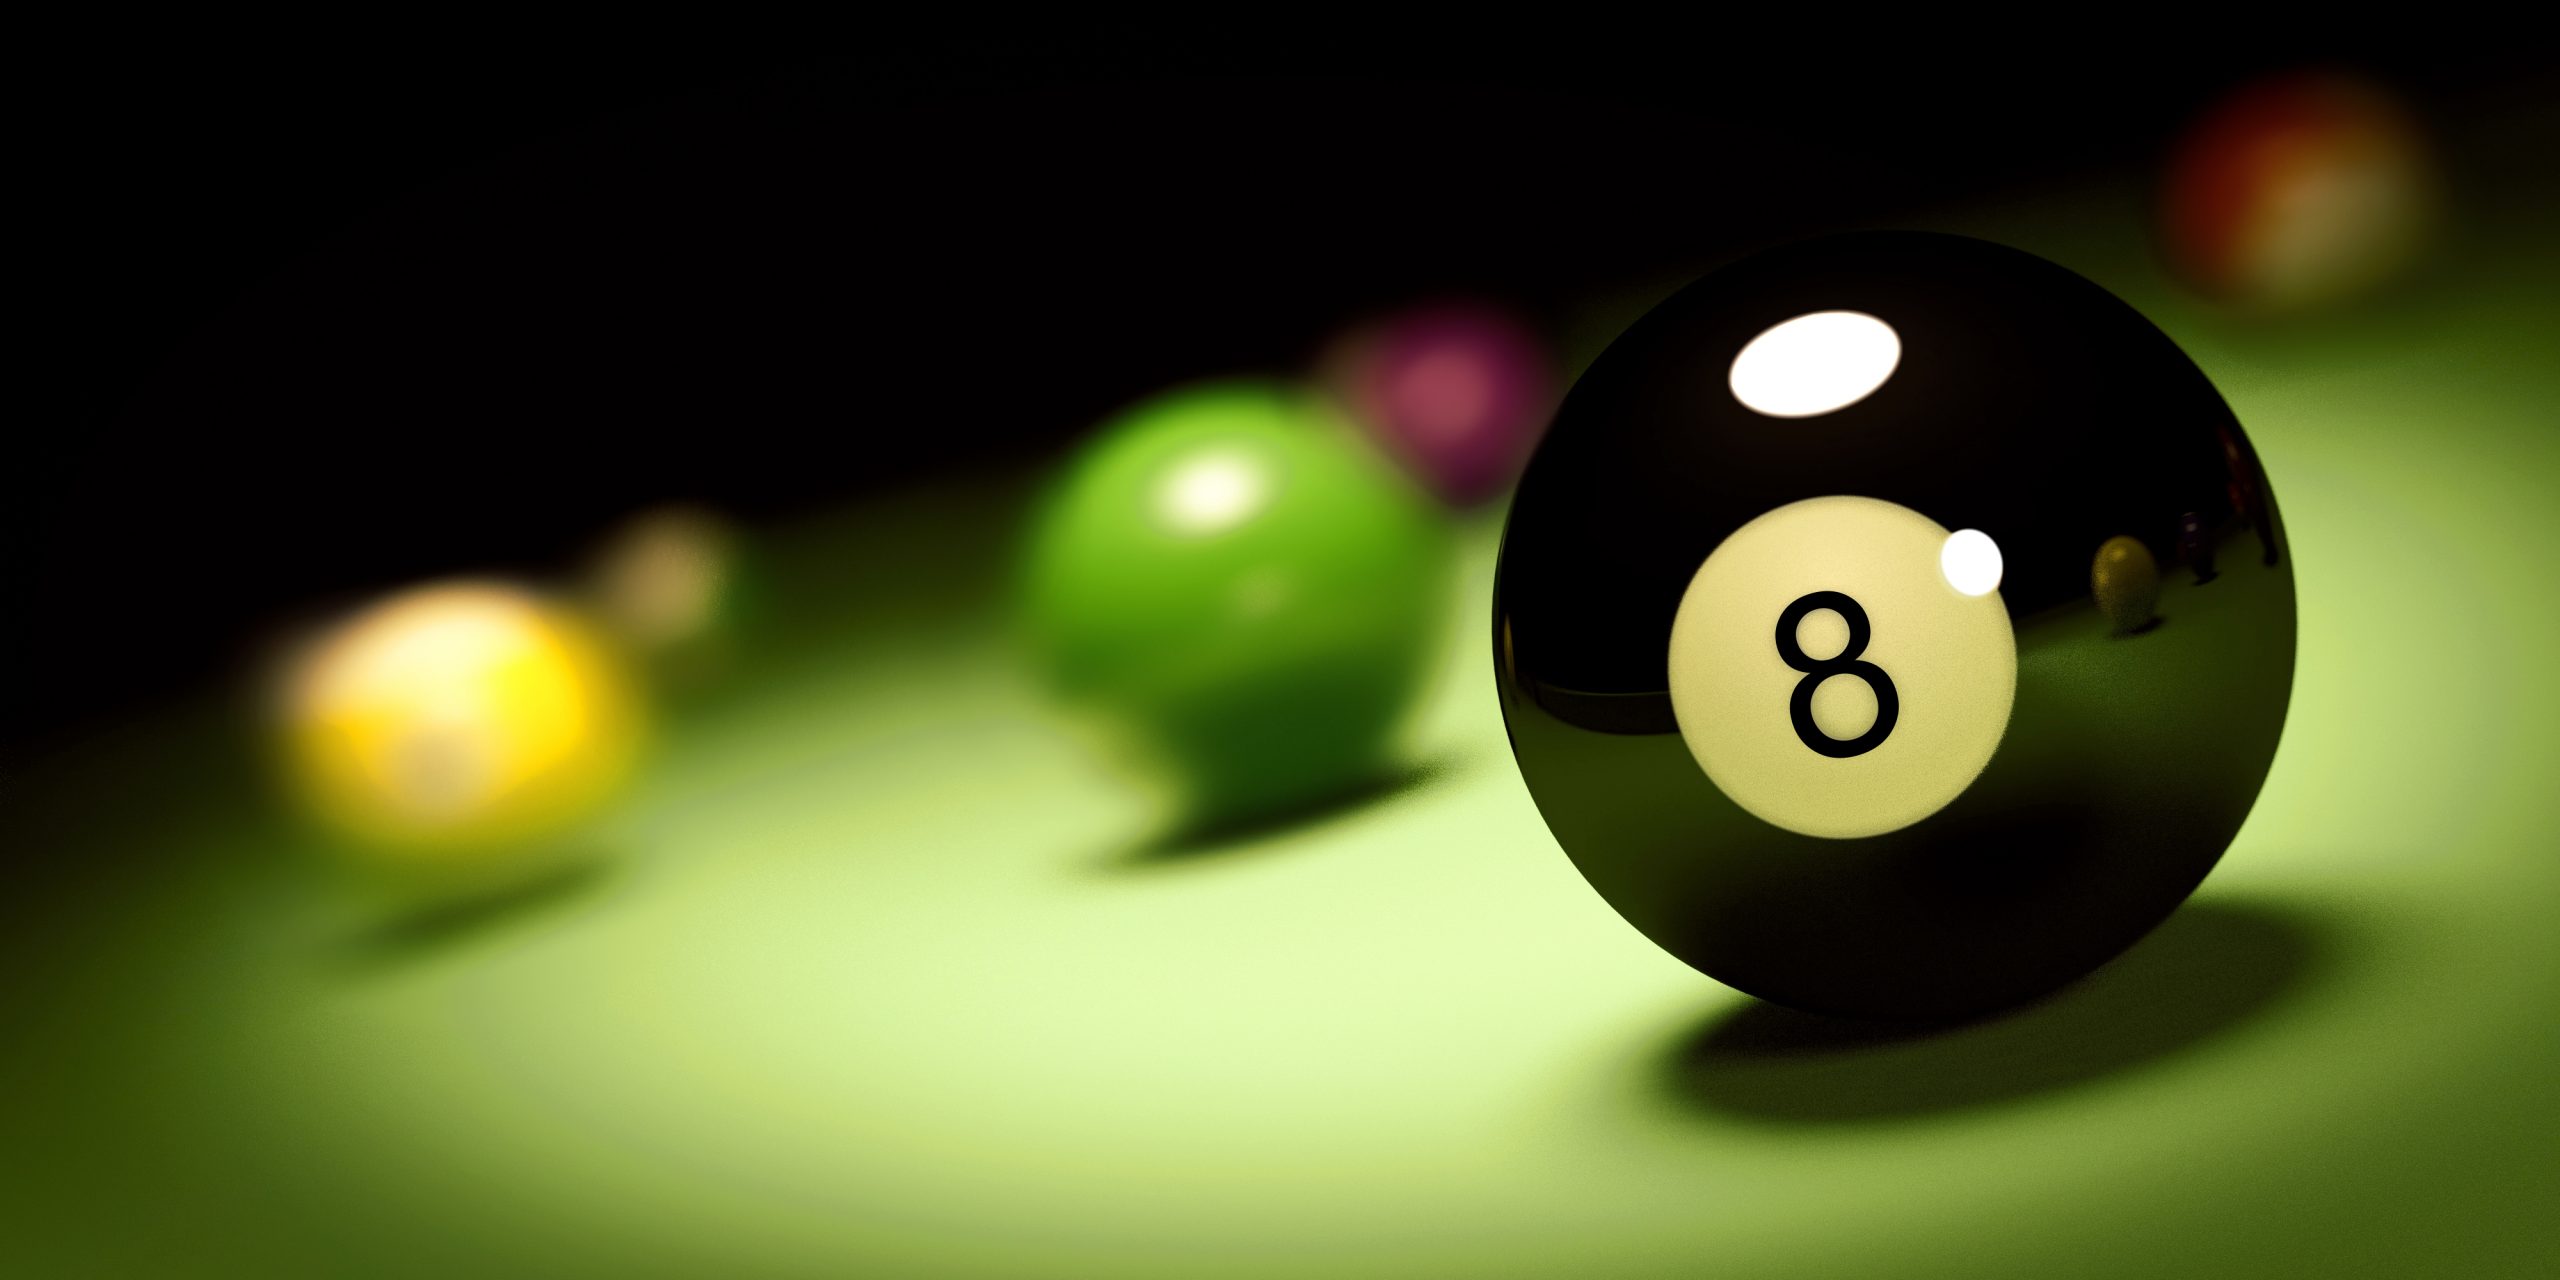 Behind the 8 Ball Splunk Implementation